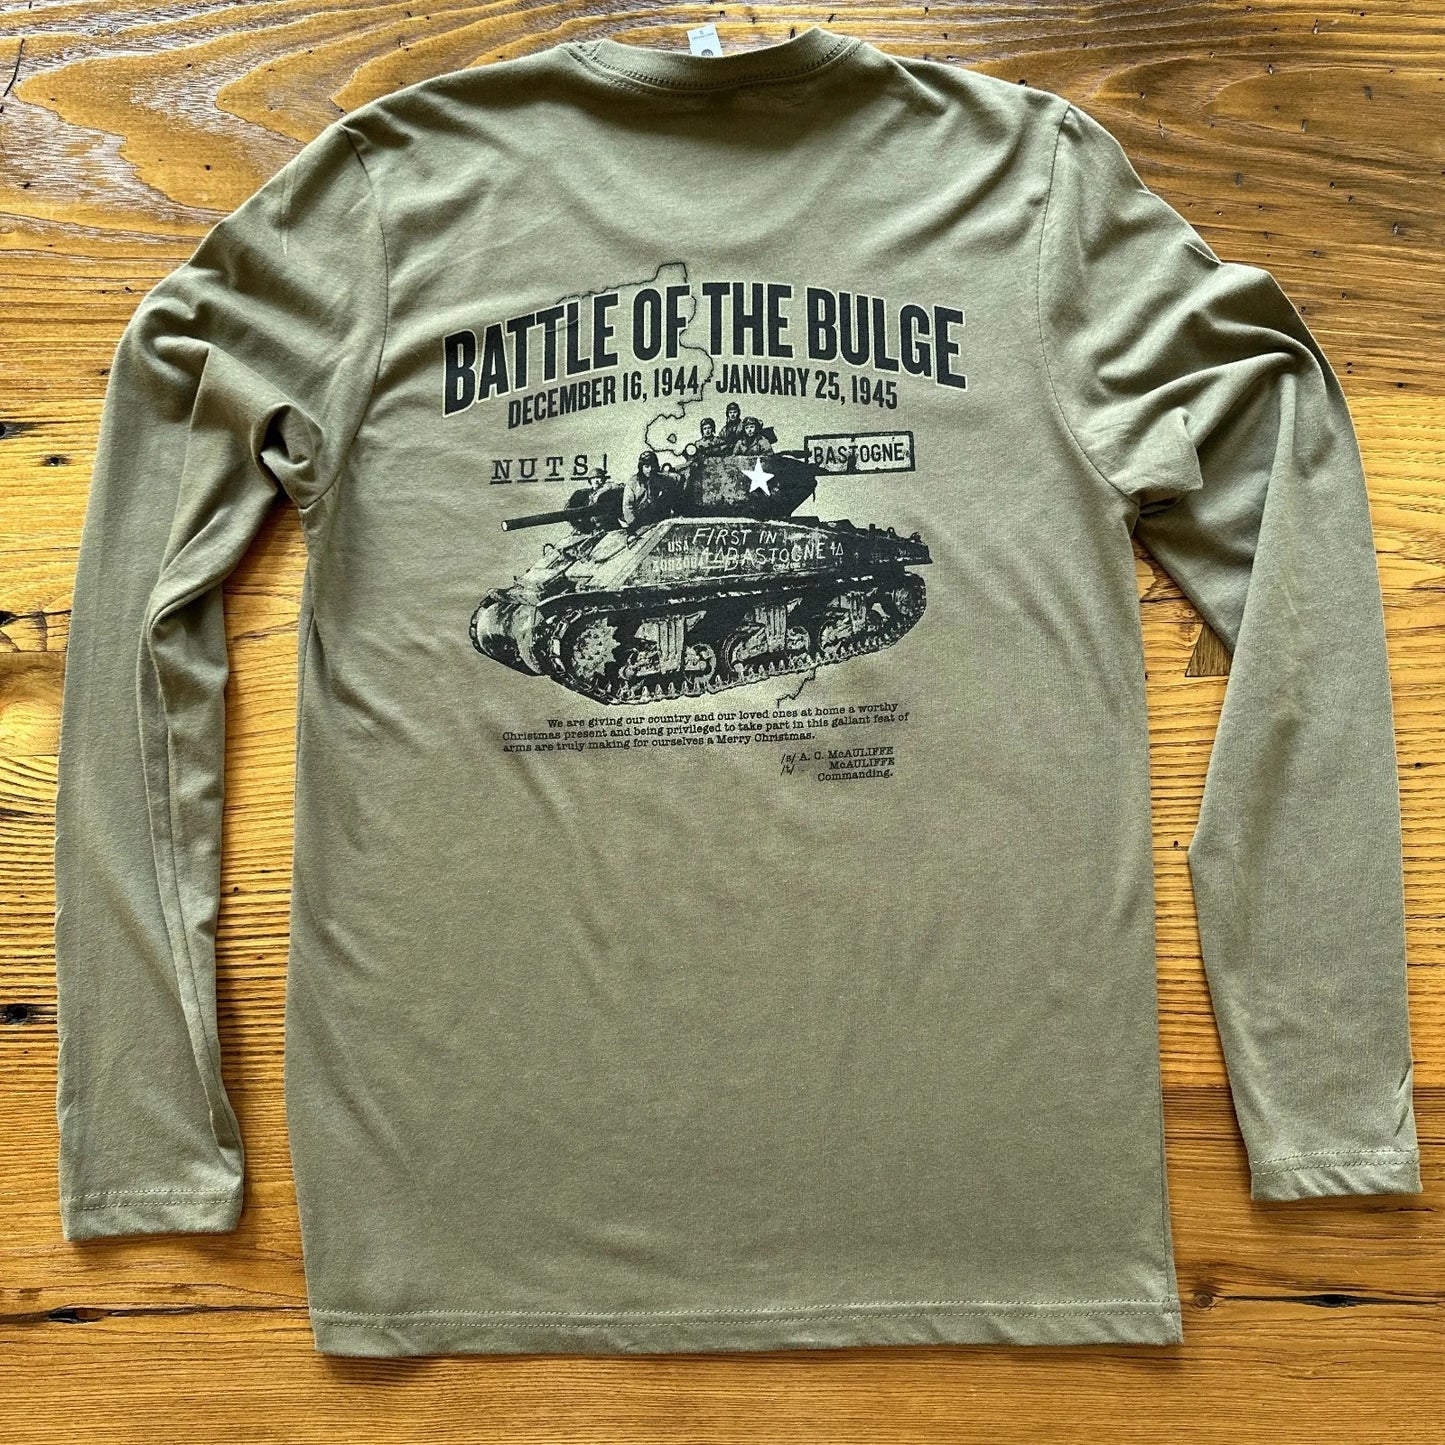 Back of The Battle of the Bulge Long-sleeved shirt from The History List store